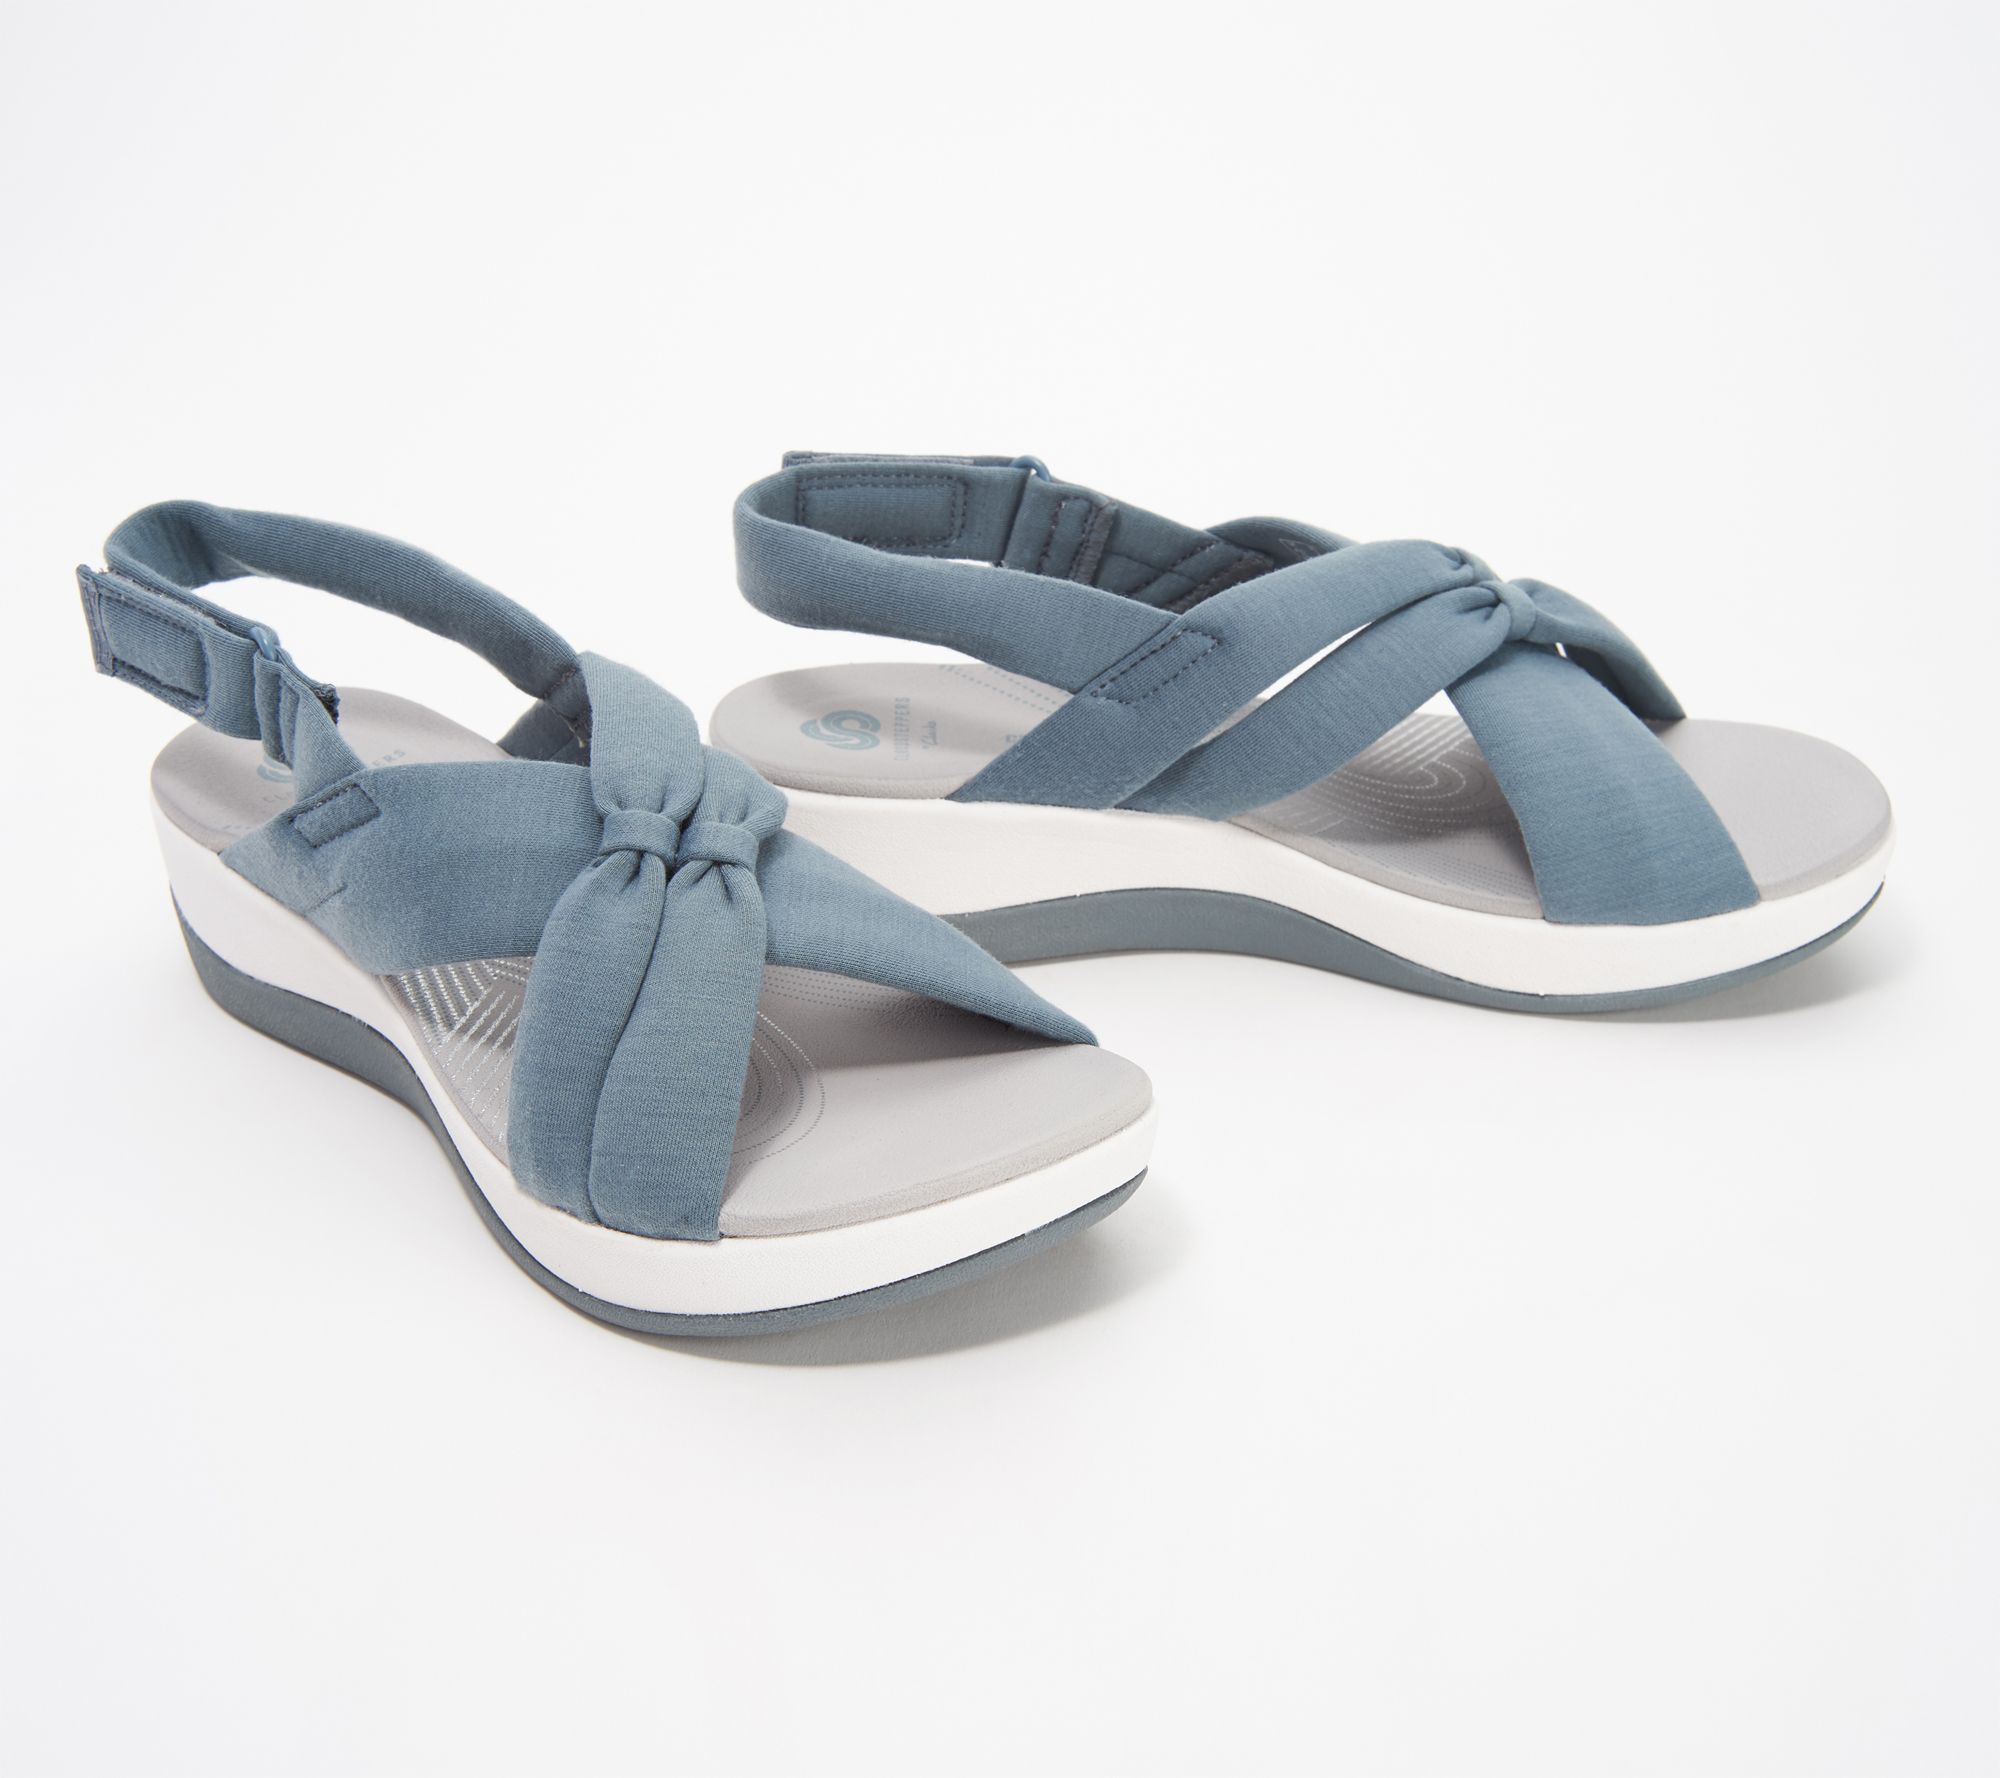 clarks cloudsteppers jersey slippers